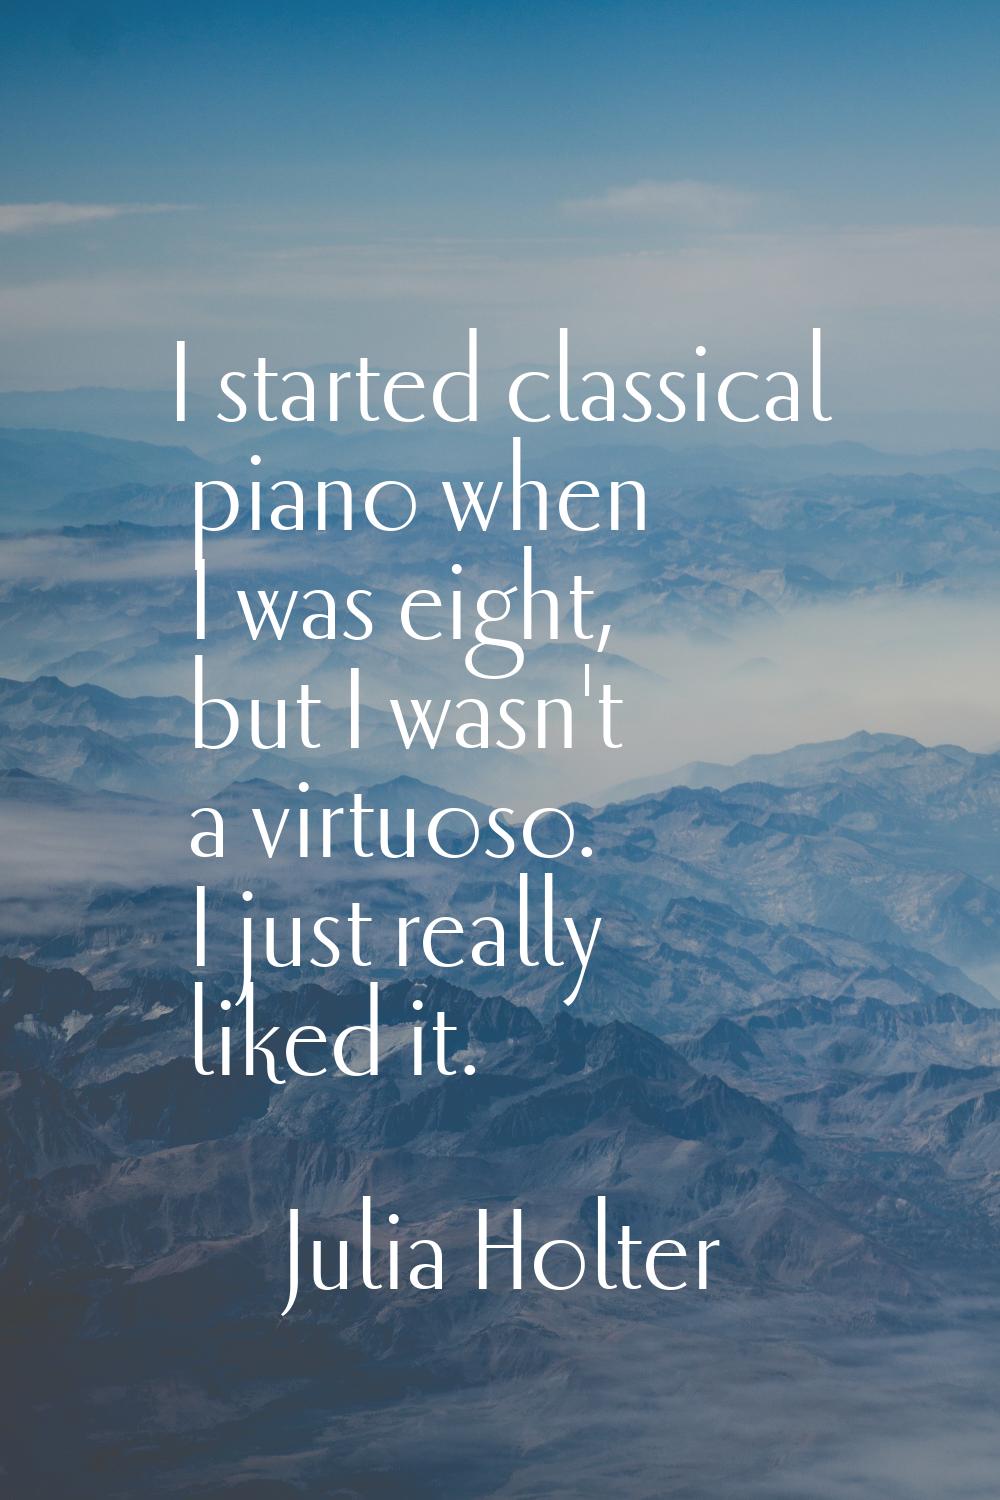 I started classical piano when I was eight, but I wasn't a virtuoso. I just really liked it.